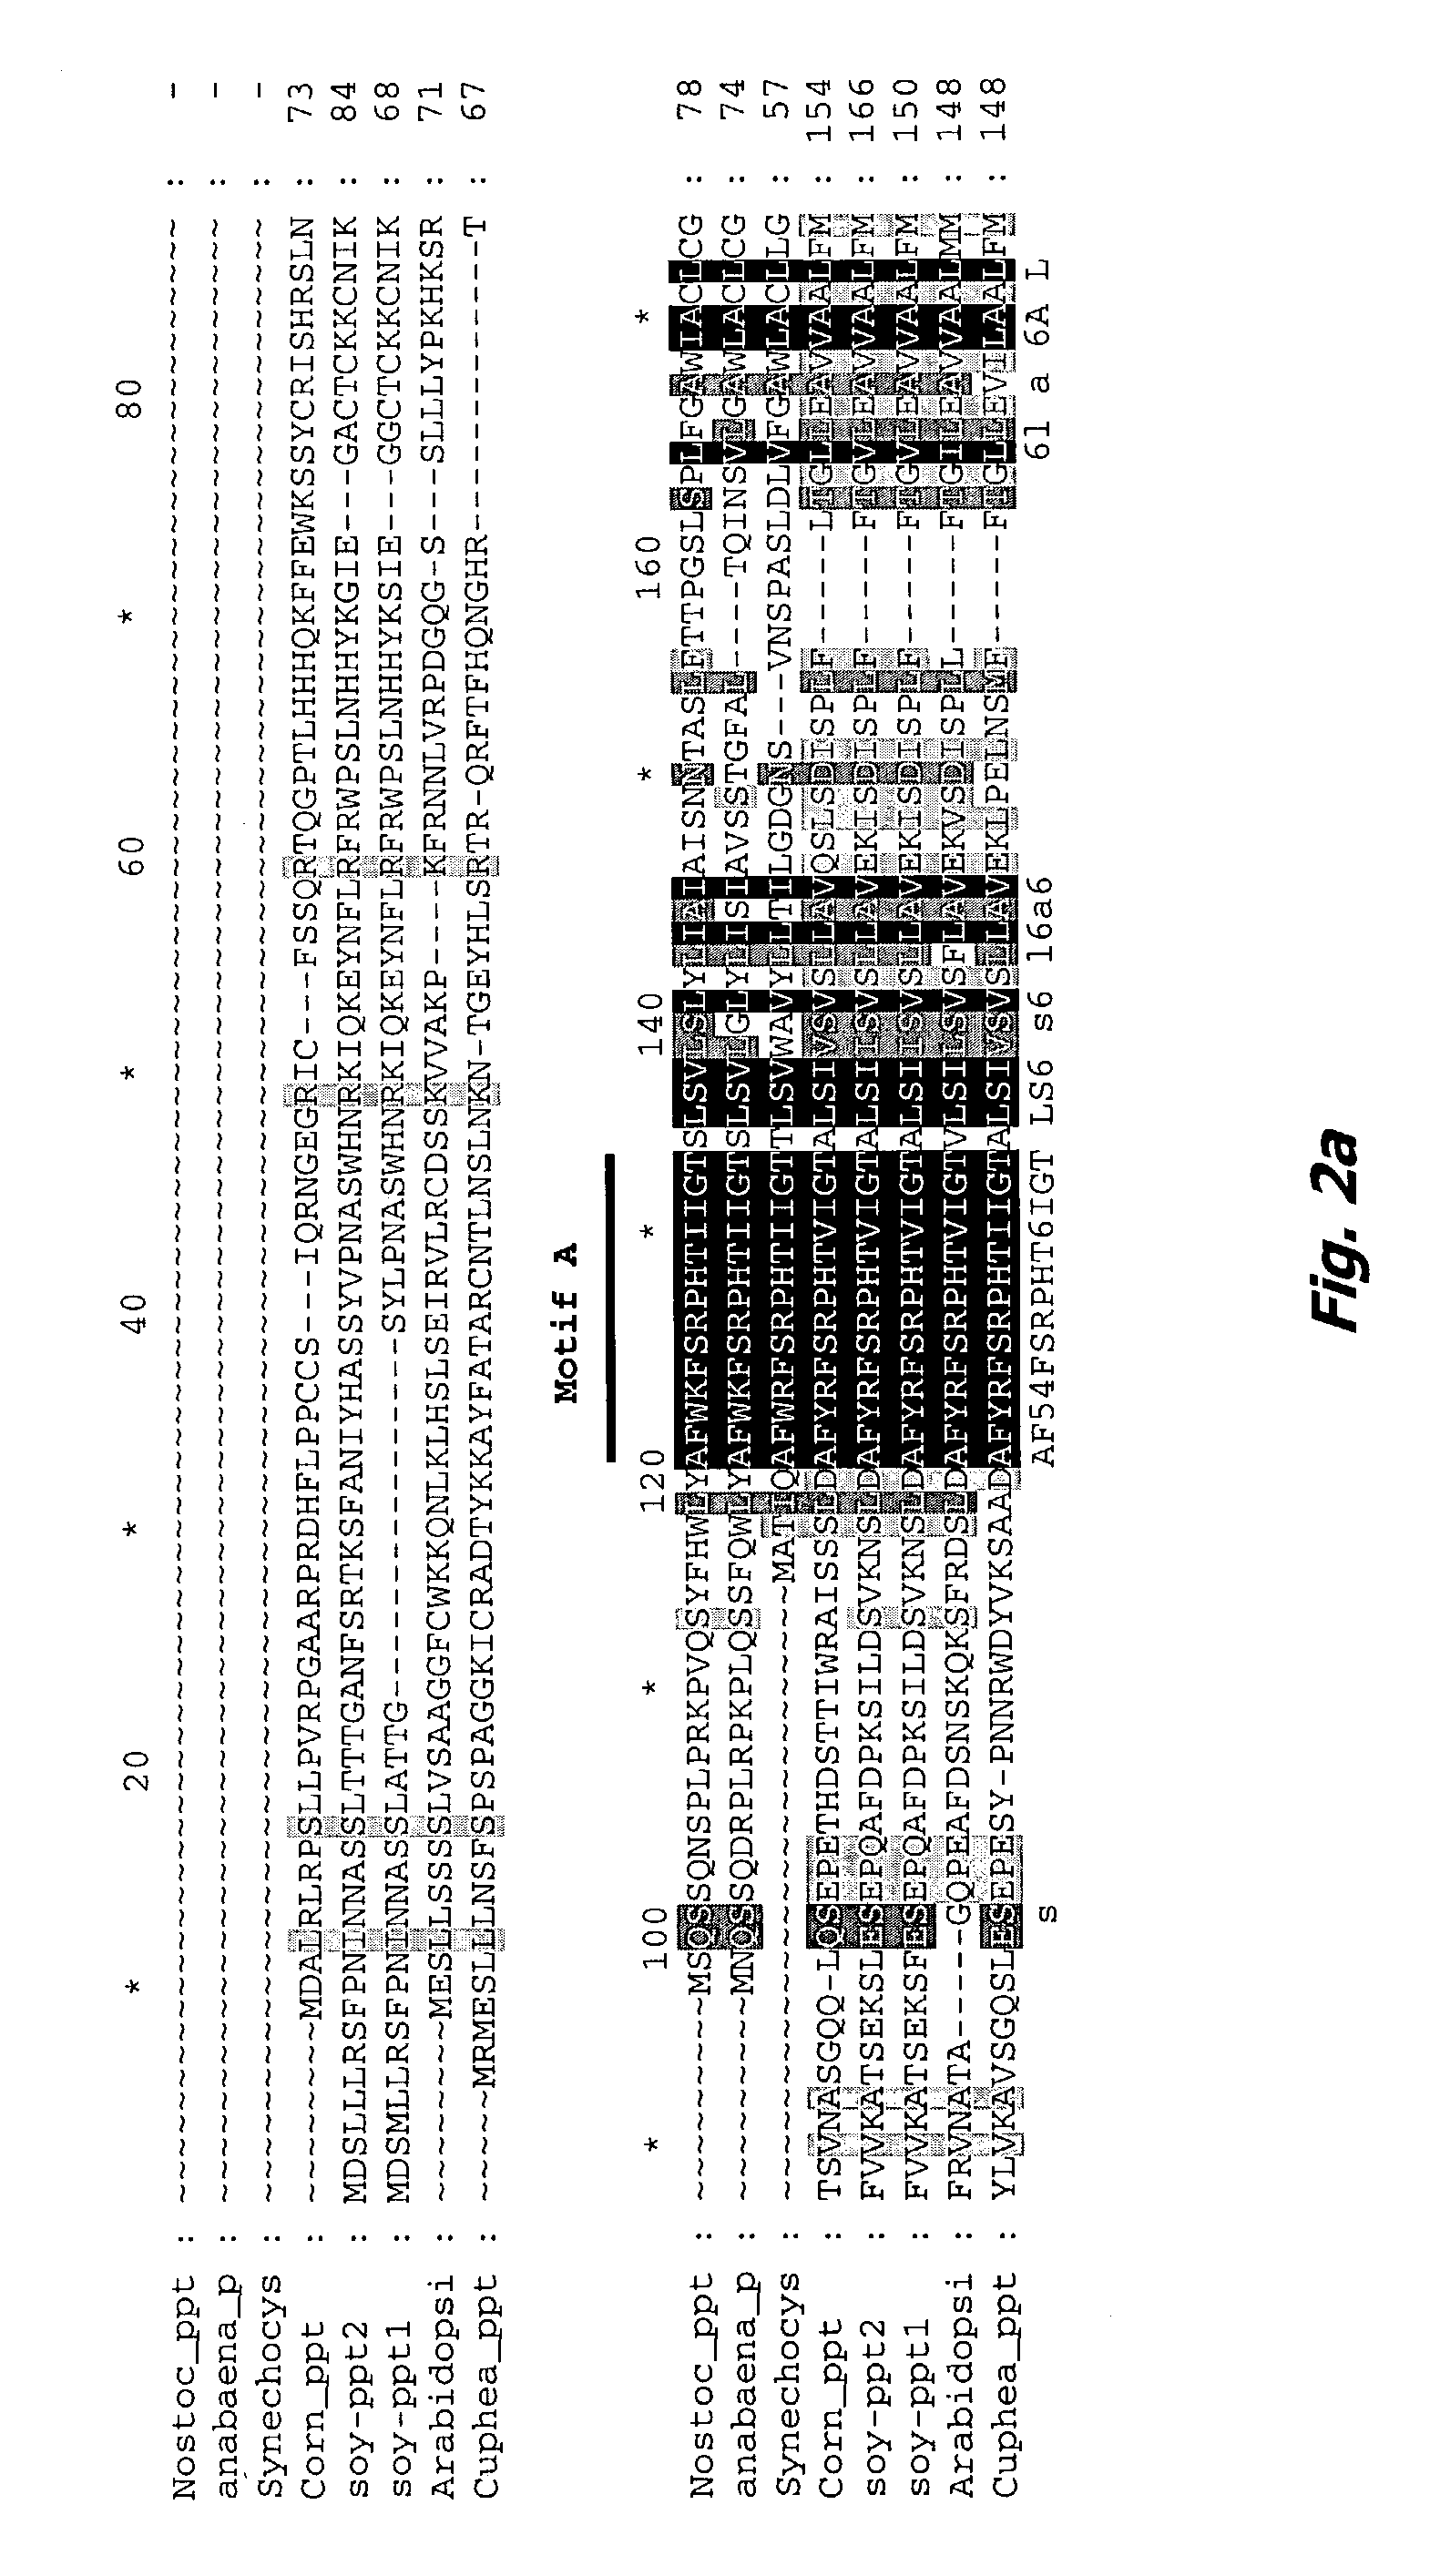 Homogentisate prenyl transferase gene (HPT2) from arabidopsis and uses thereof